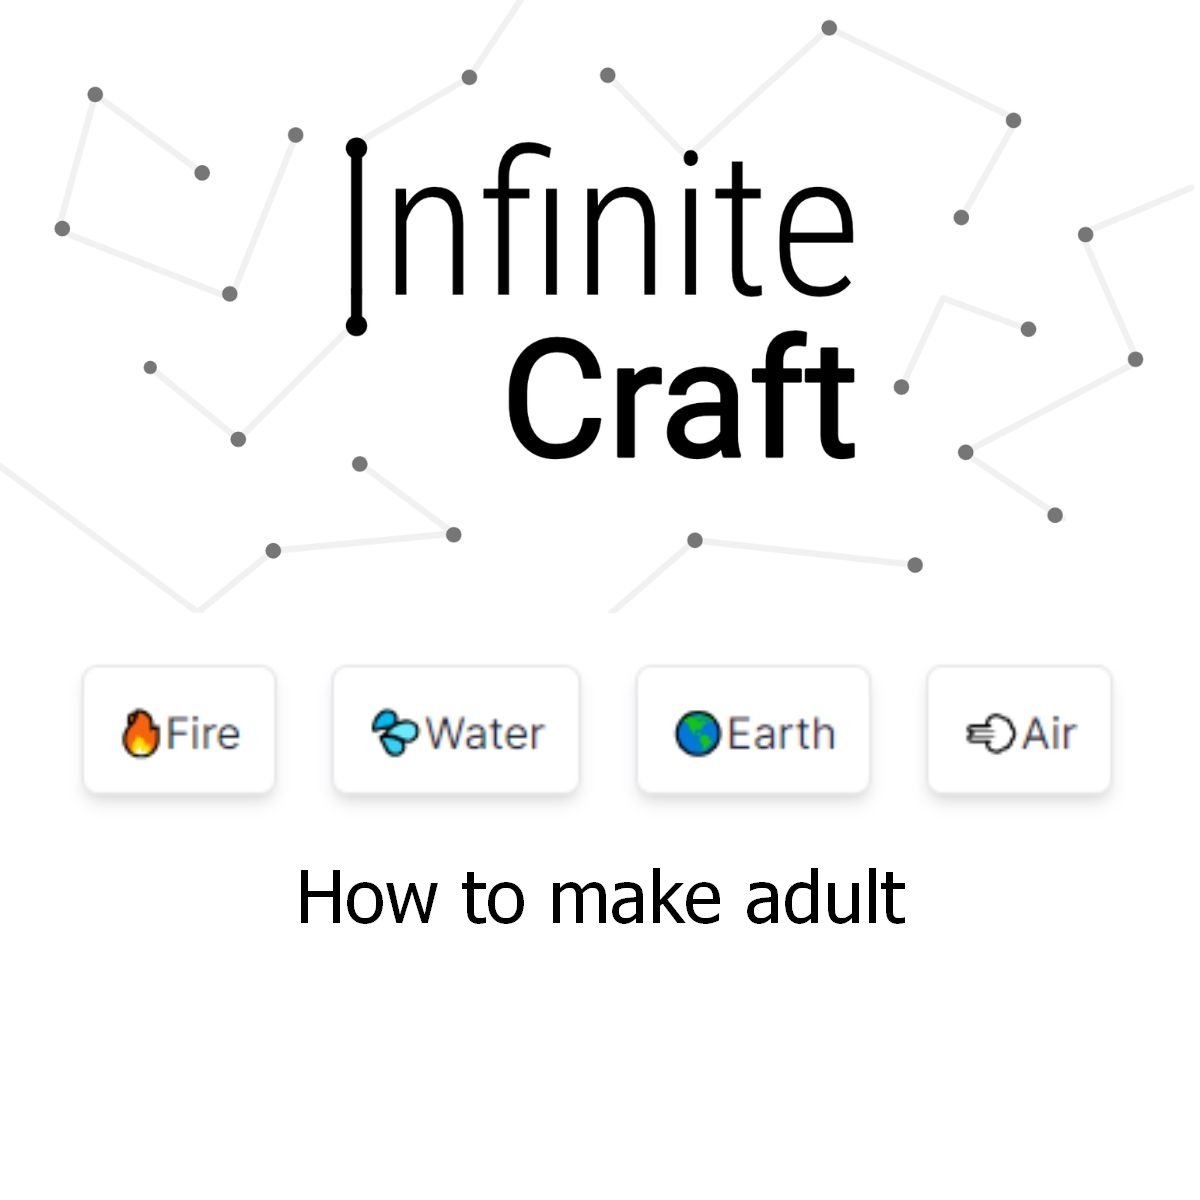 how to make adult in infinite craft